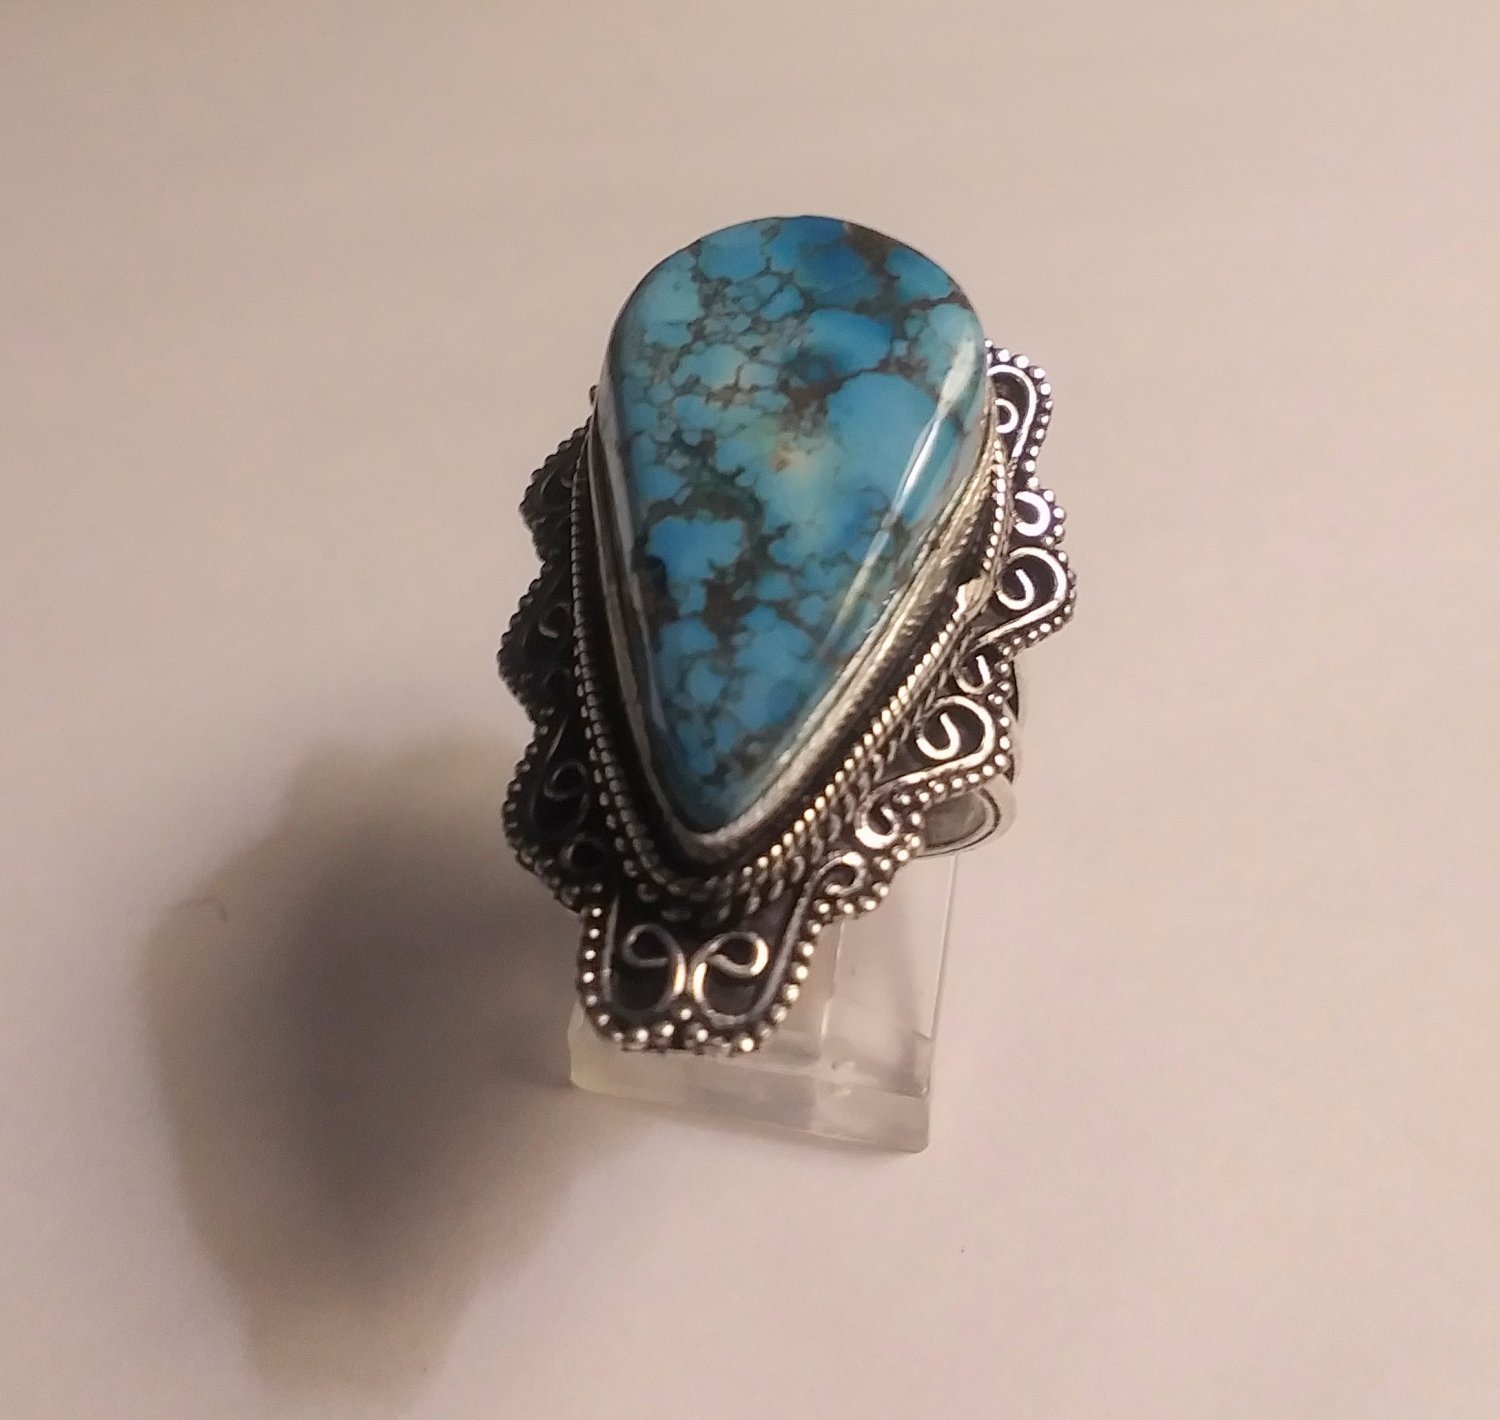 Stunning 925 Sterling Silver Turquoise Ring